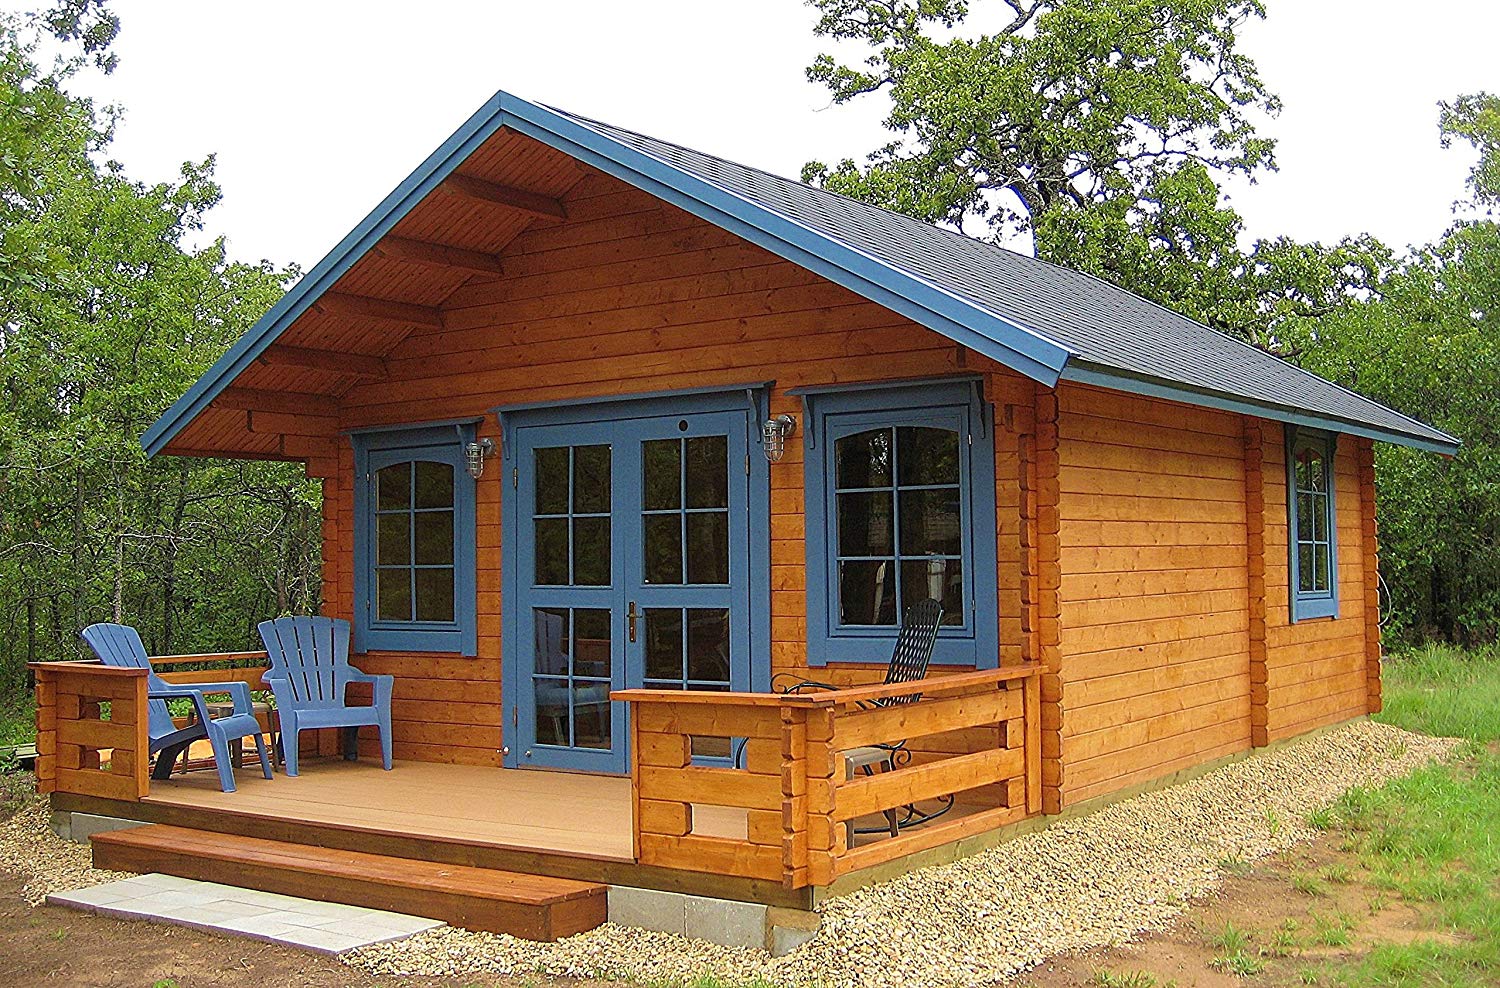 Tiny Houses: How to Buy a Home or Cabin on